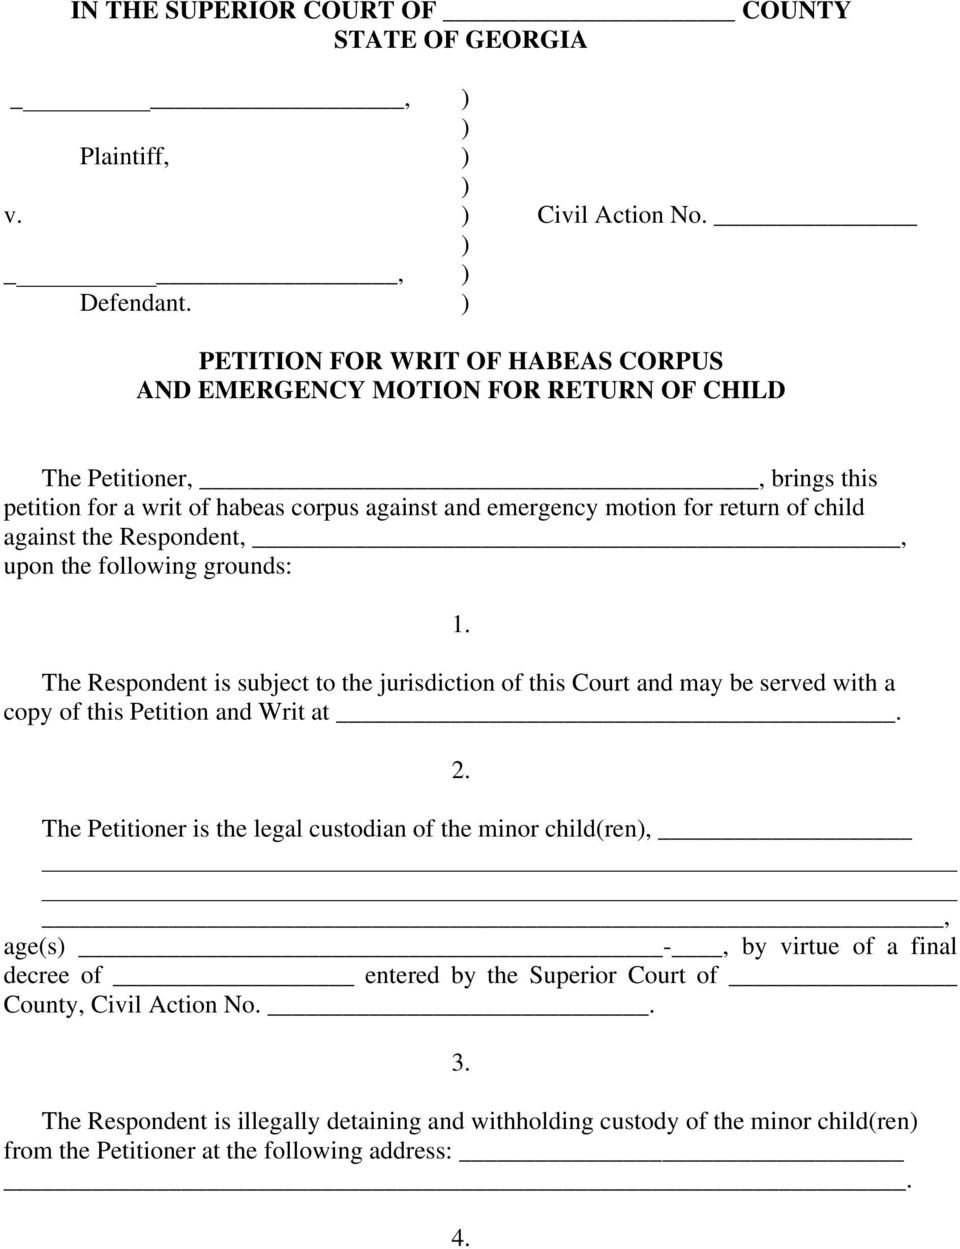 Petition For Writ Of Habeas Corpus And Emergency Return Of Child Packet Pdf Free Download